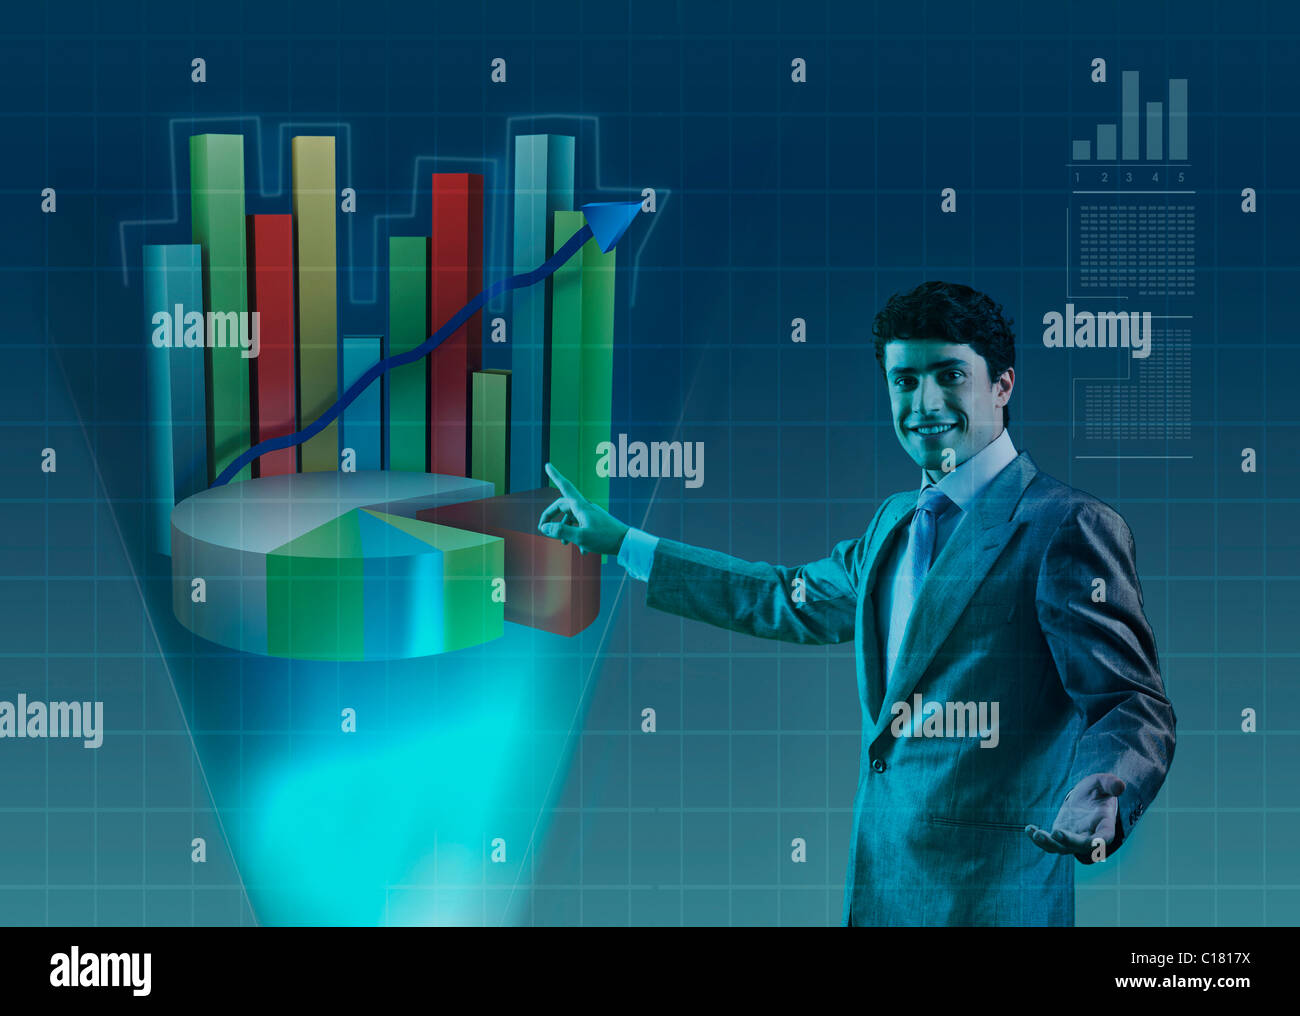 Businessman pointing at a bar graph Stock Photo